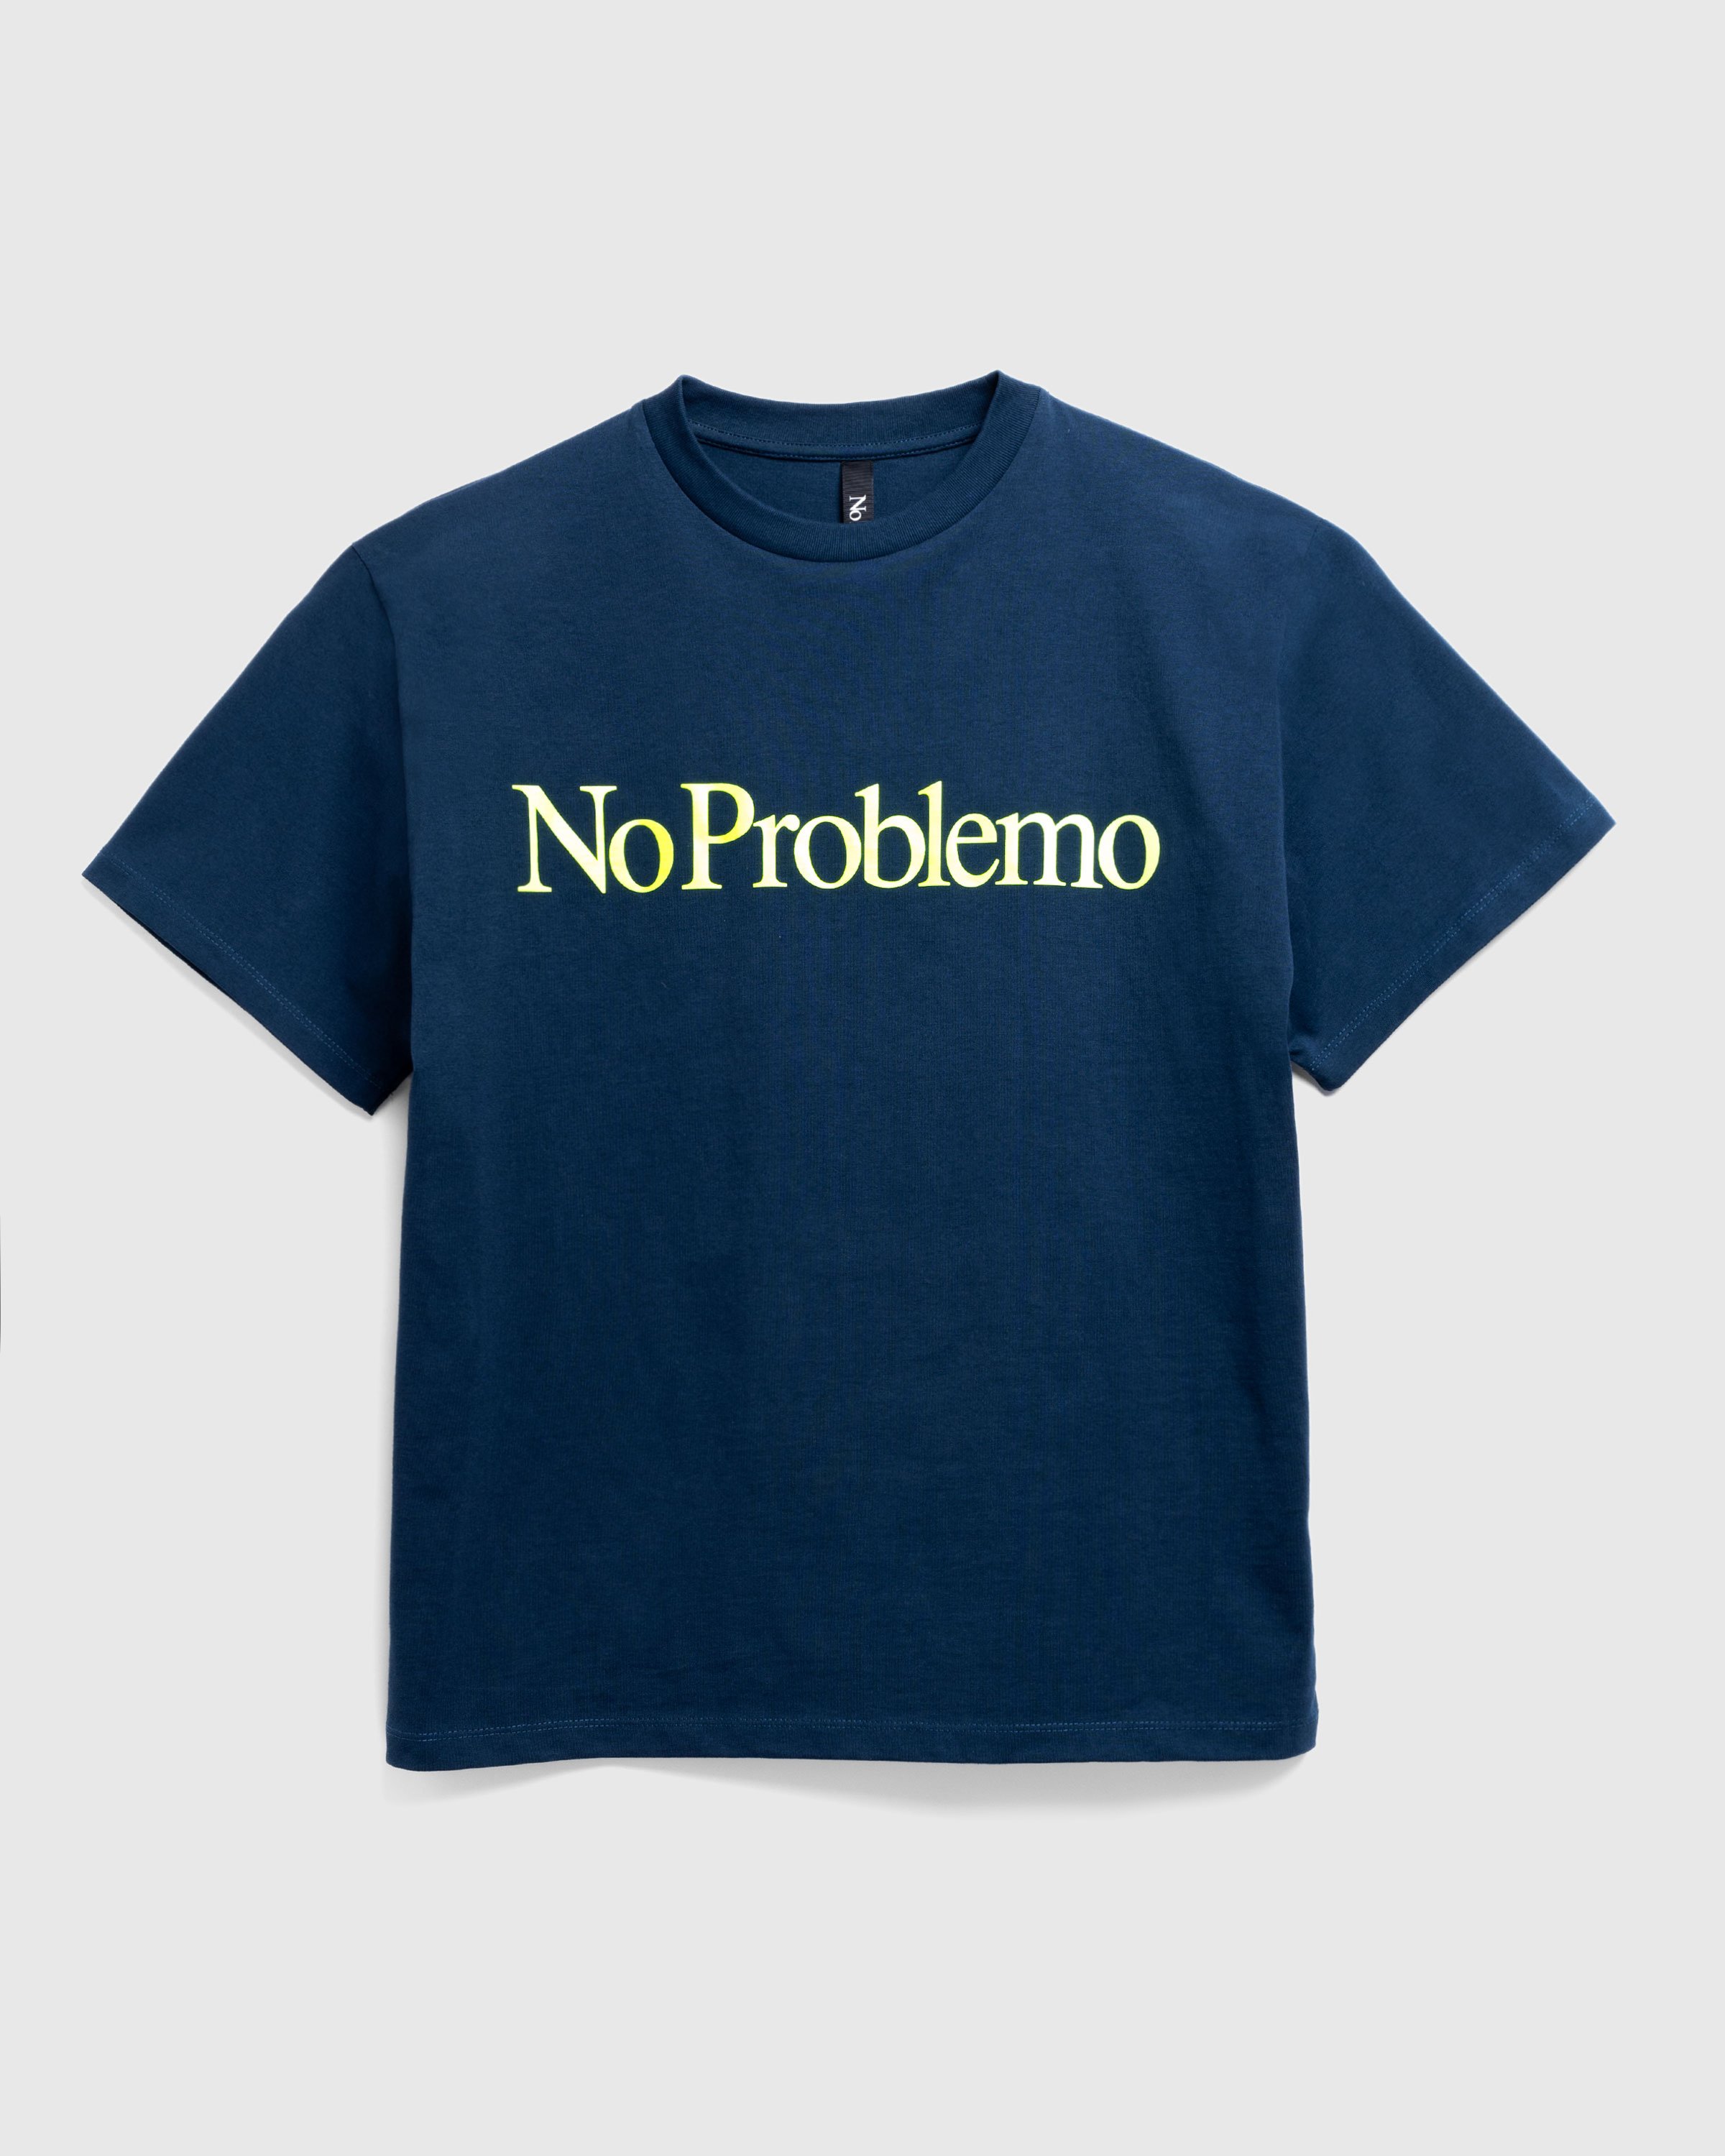 Aries - No Problemo SS Tee Navy - Clothing - Blue - Image 1